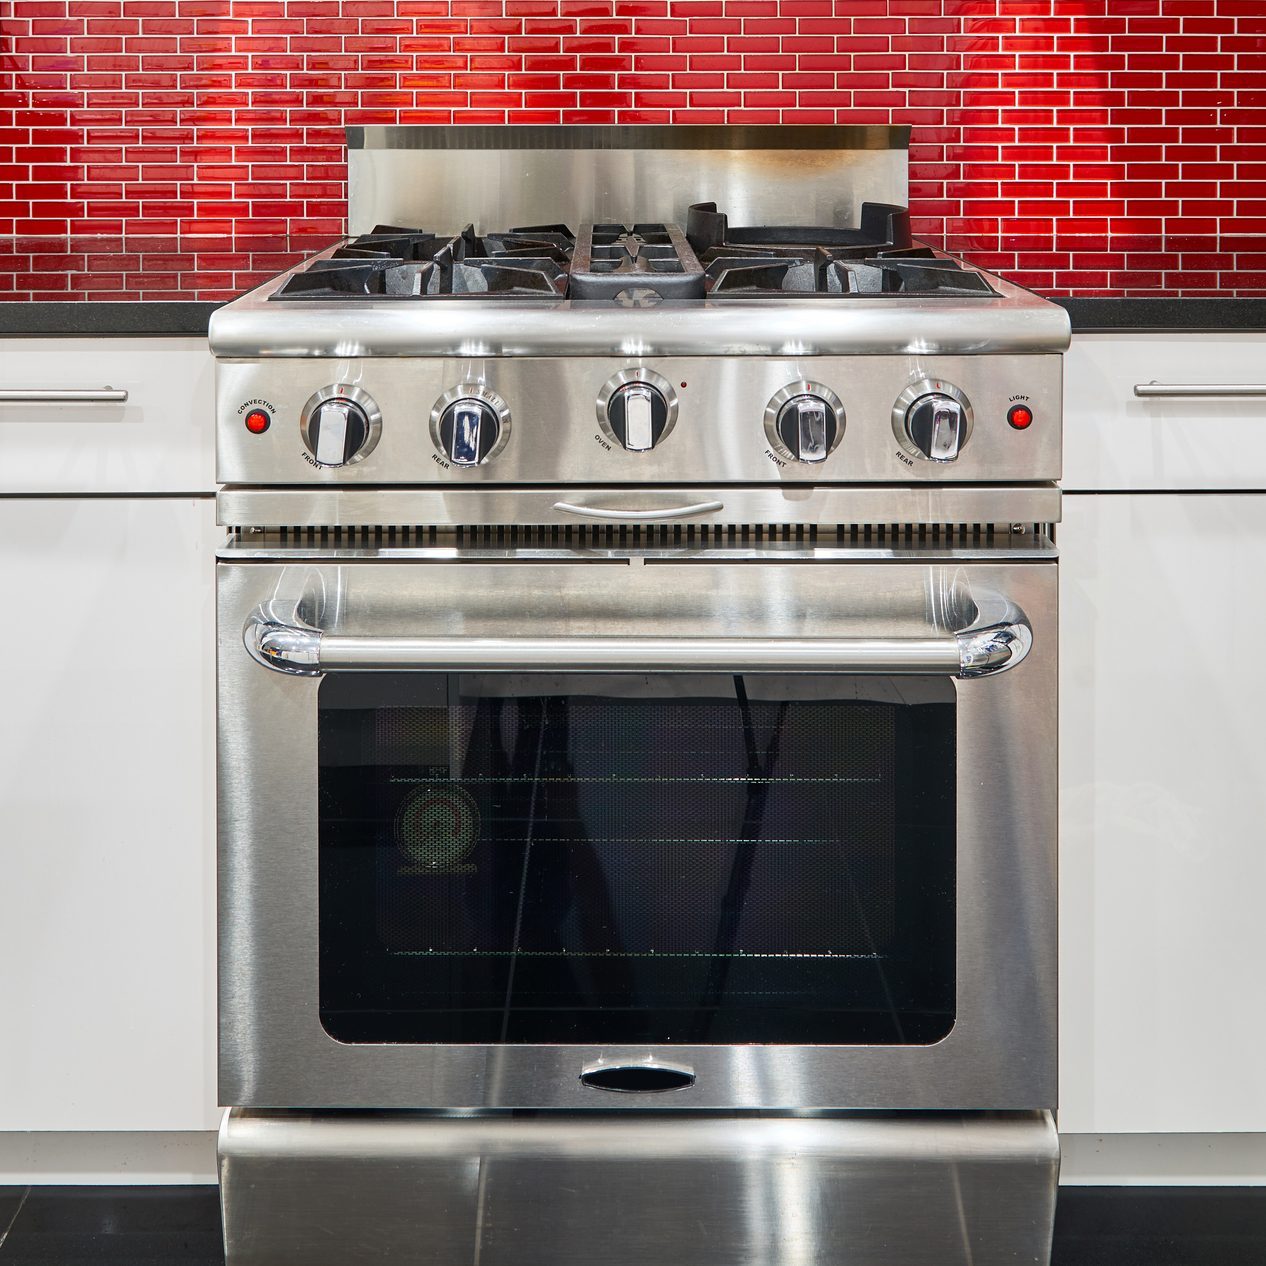 How Does a Self-Cleaning Oven Work & How Do You Use It?